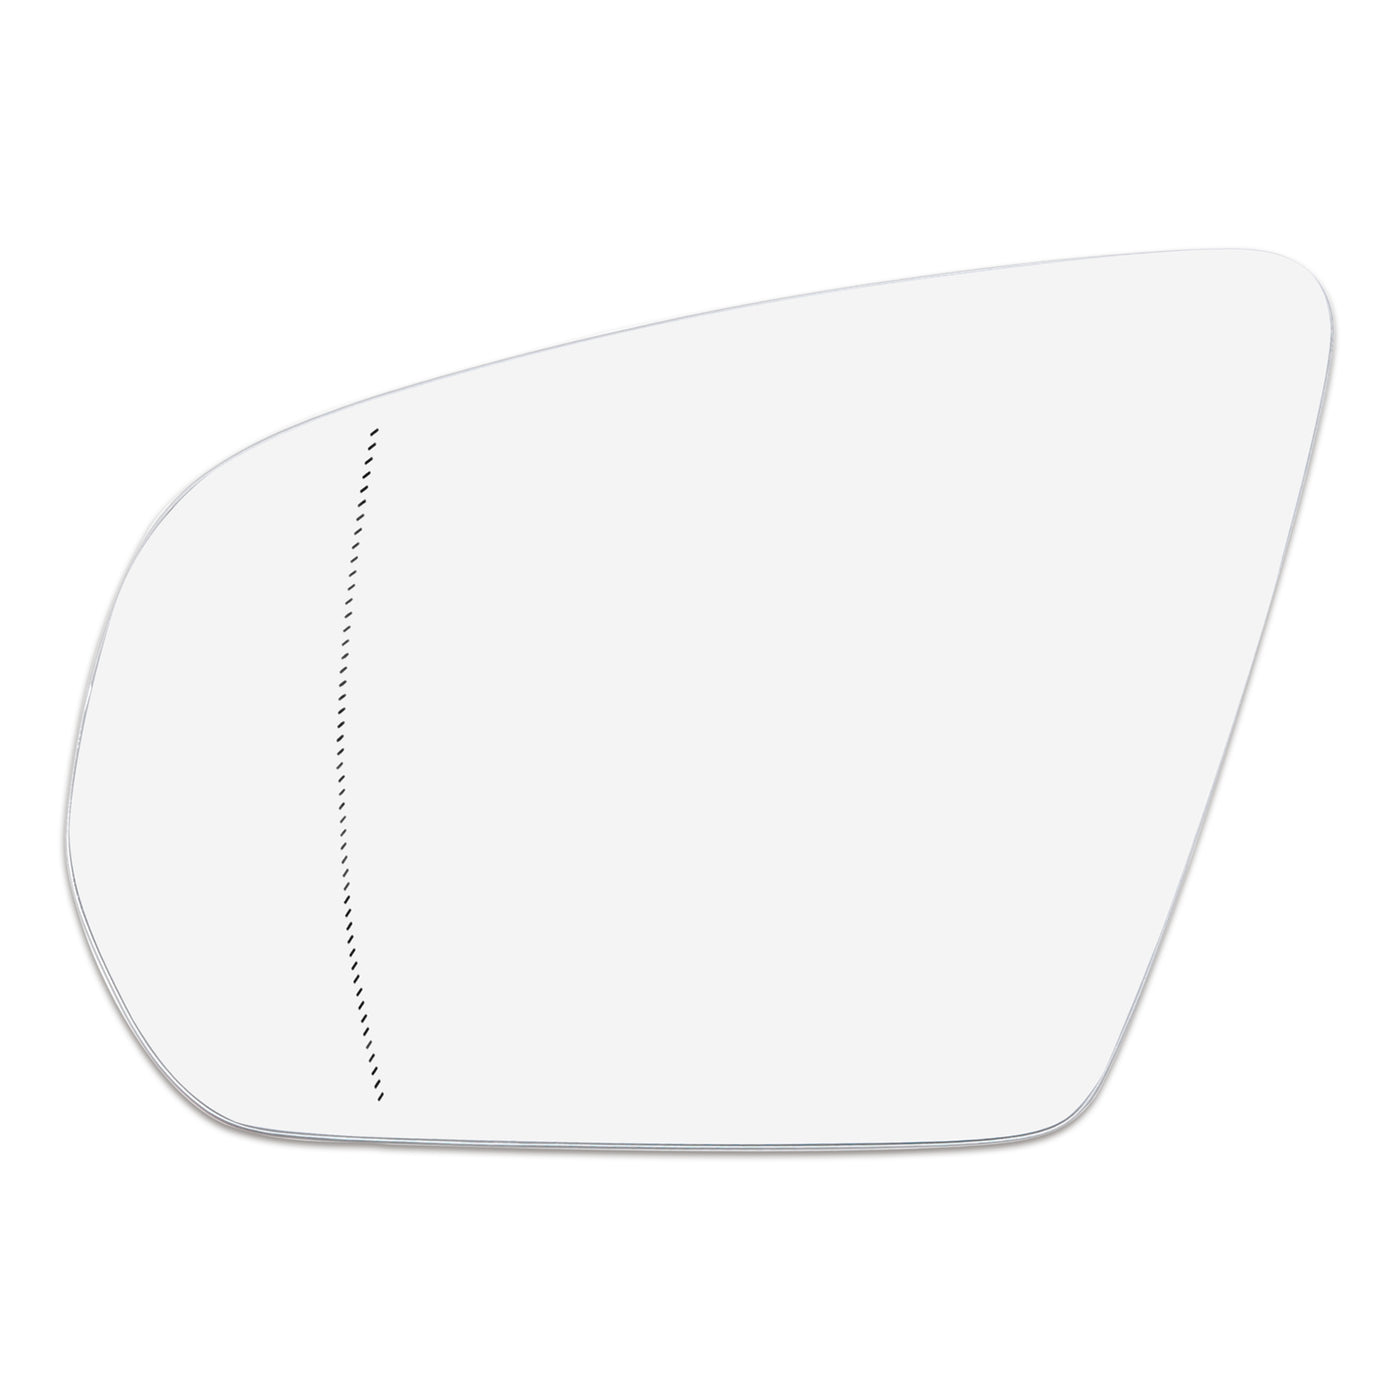 X AUTOHAUX Car Left Rearview Mirror Glass Heated with Backing Side Plate A0998100516 for Mercedes-Benz